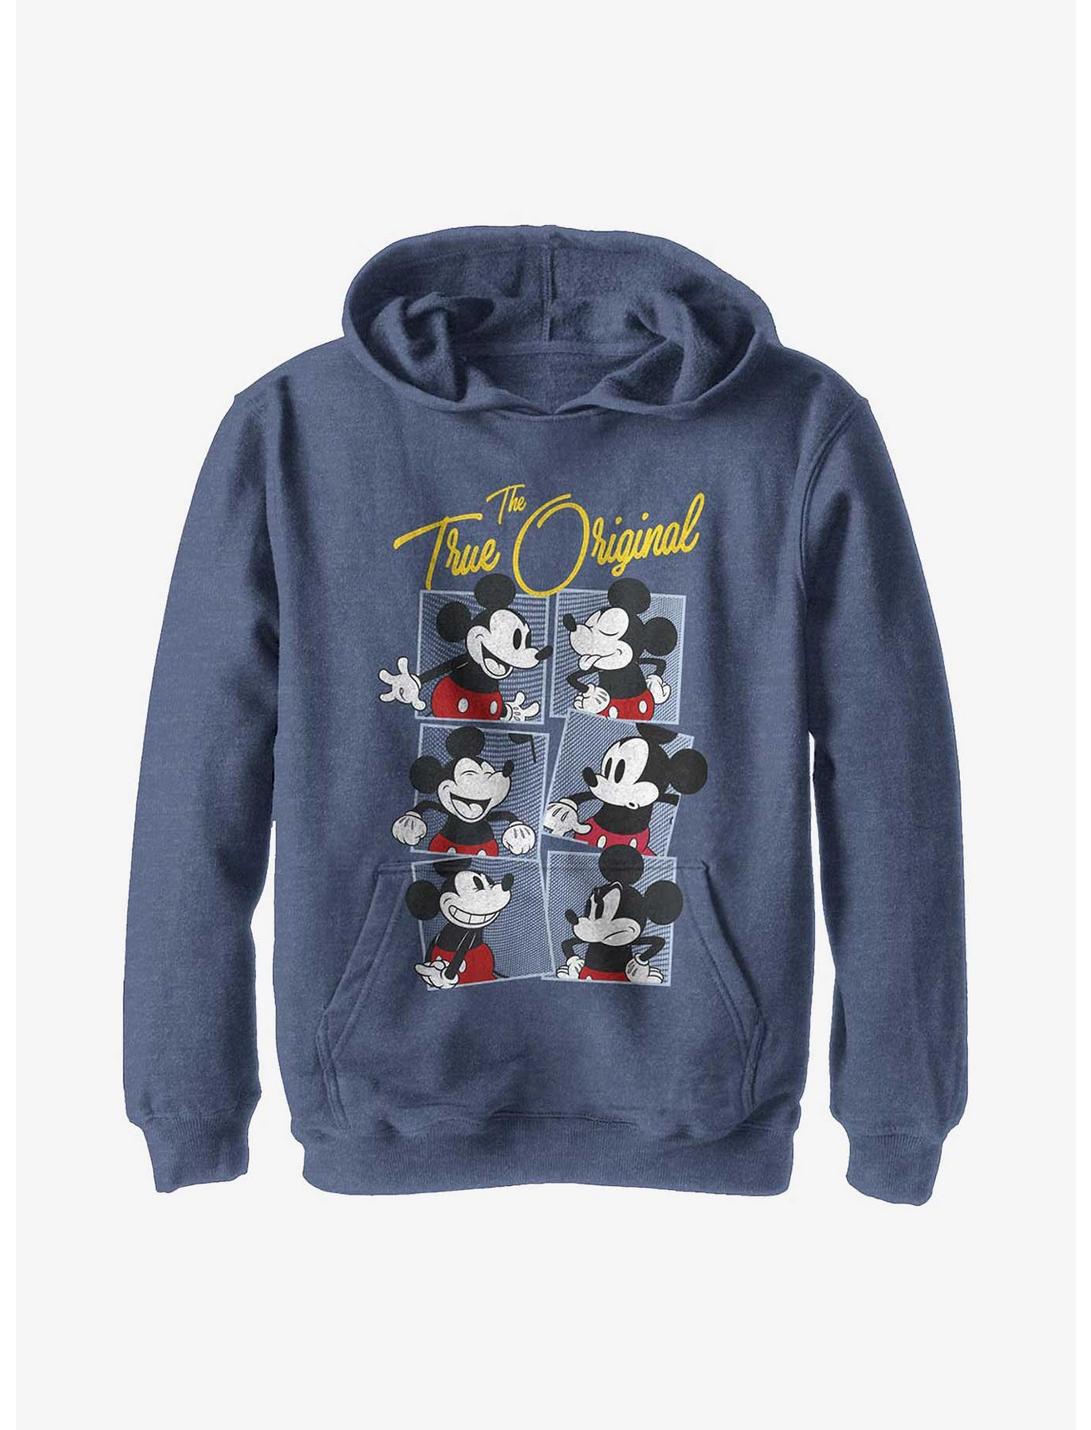 Disney Mickey Mouse The True Original Youth Hoodie, NAVY HTR, hi-res